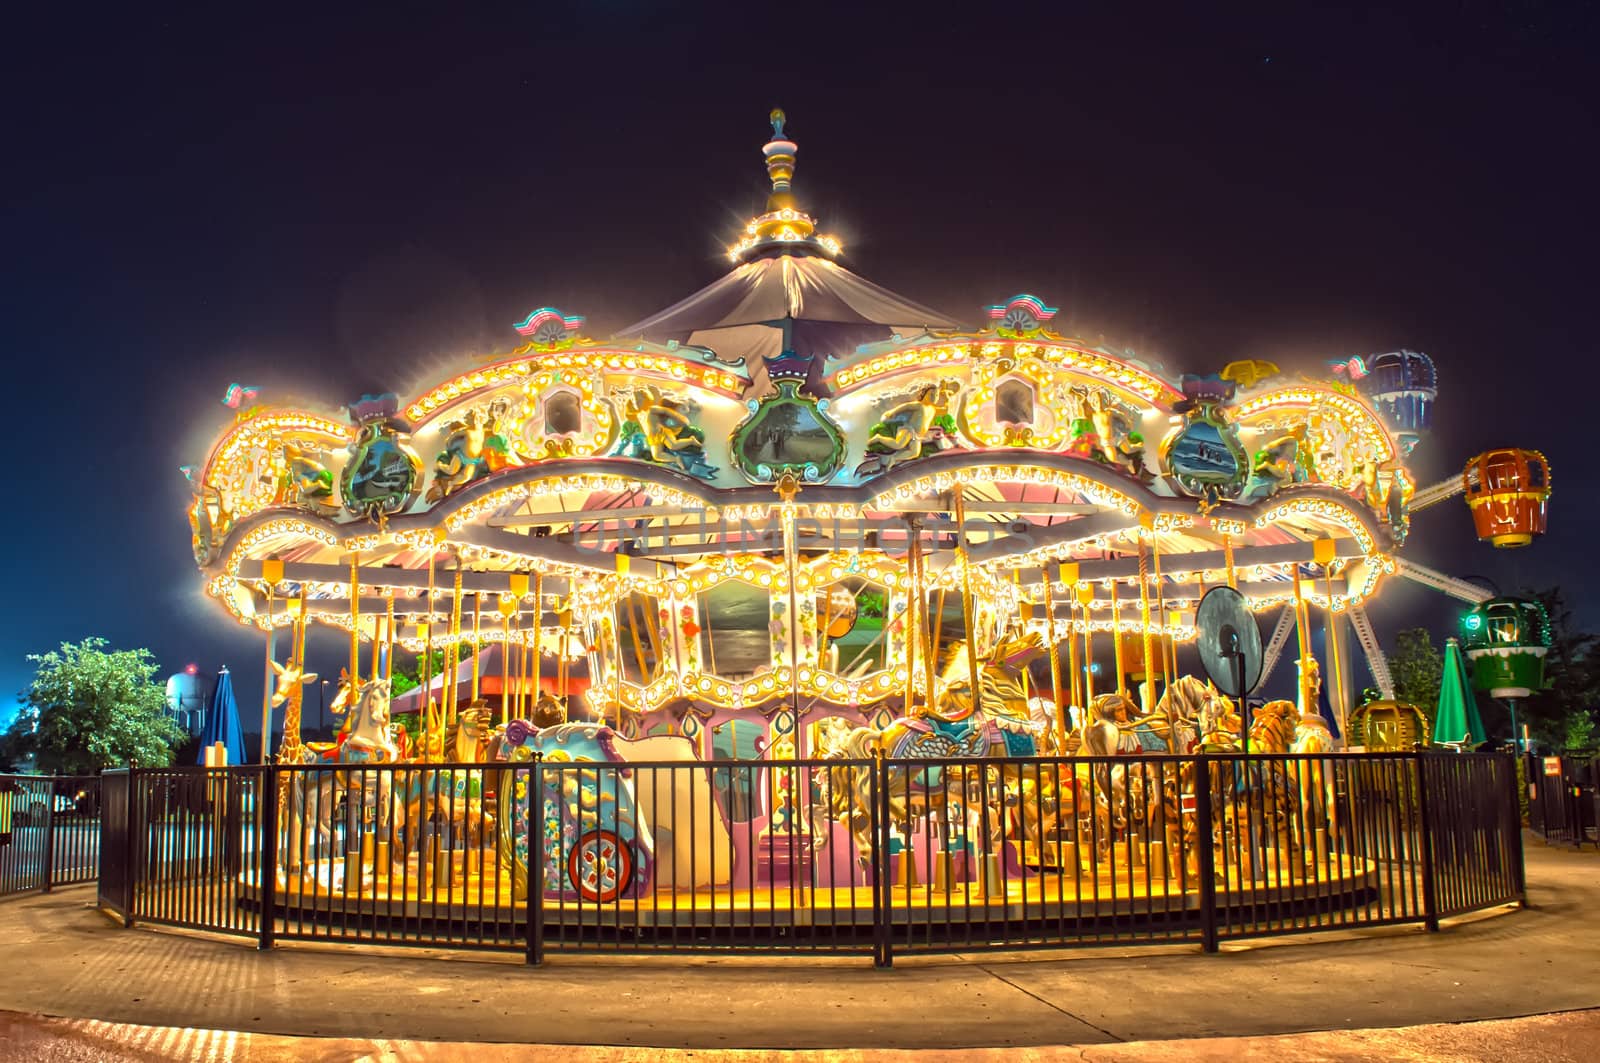 carousel at night by digidreamgrafix